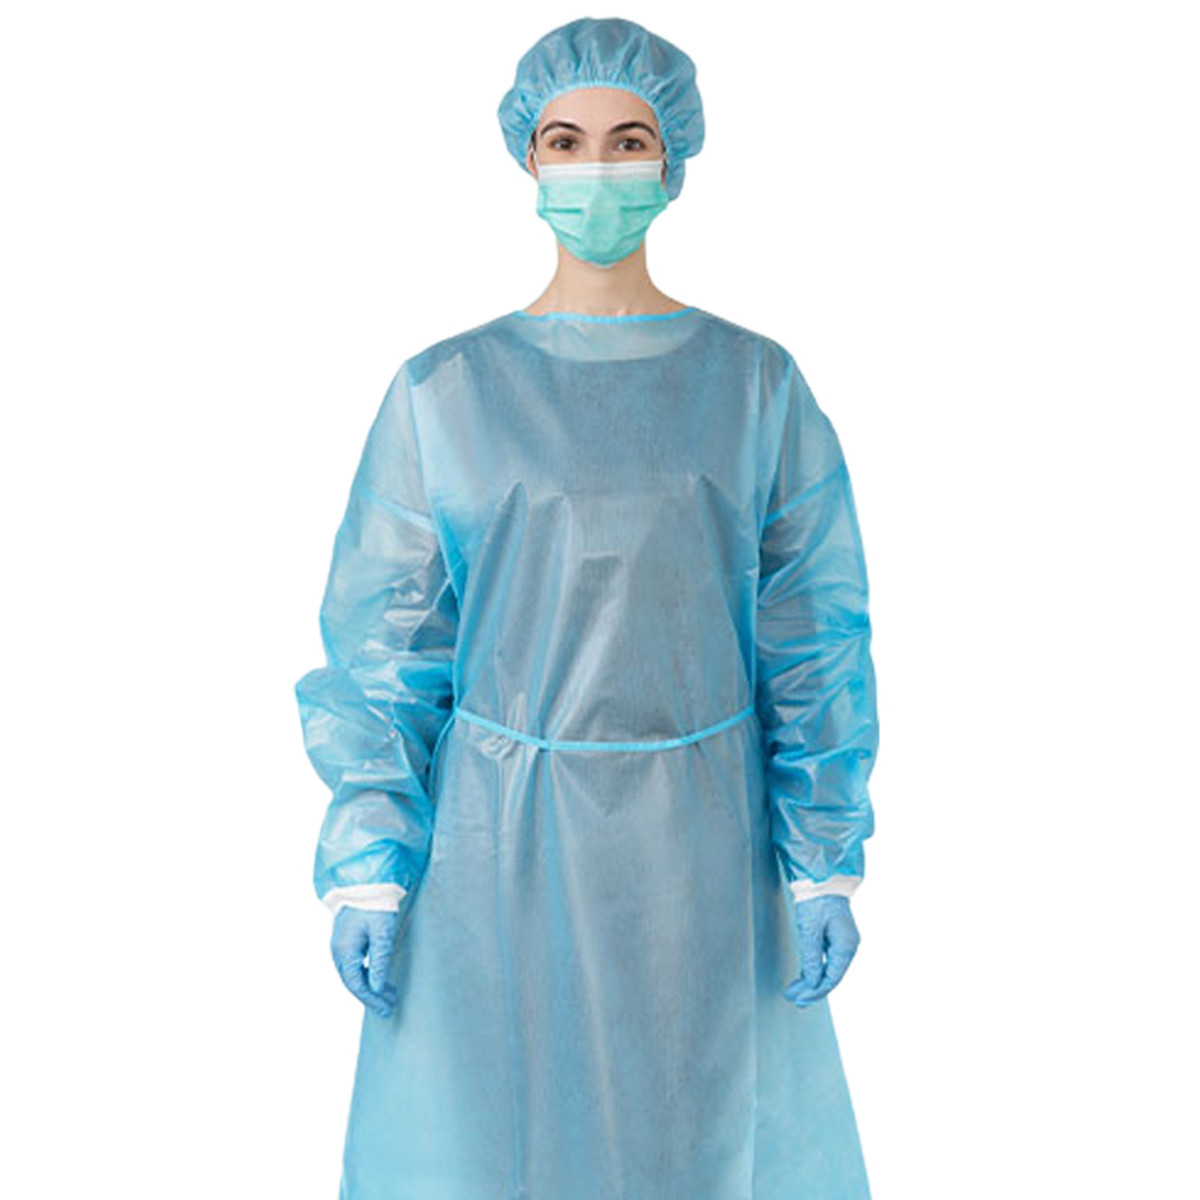 SafeWear Form-Fit Isolation Gown